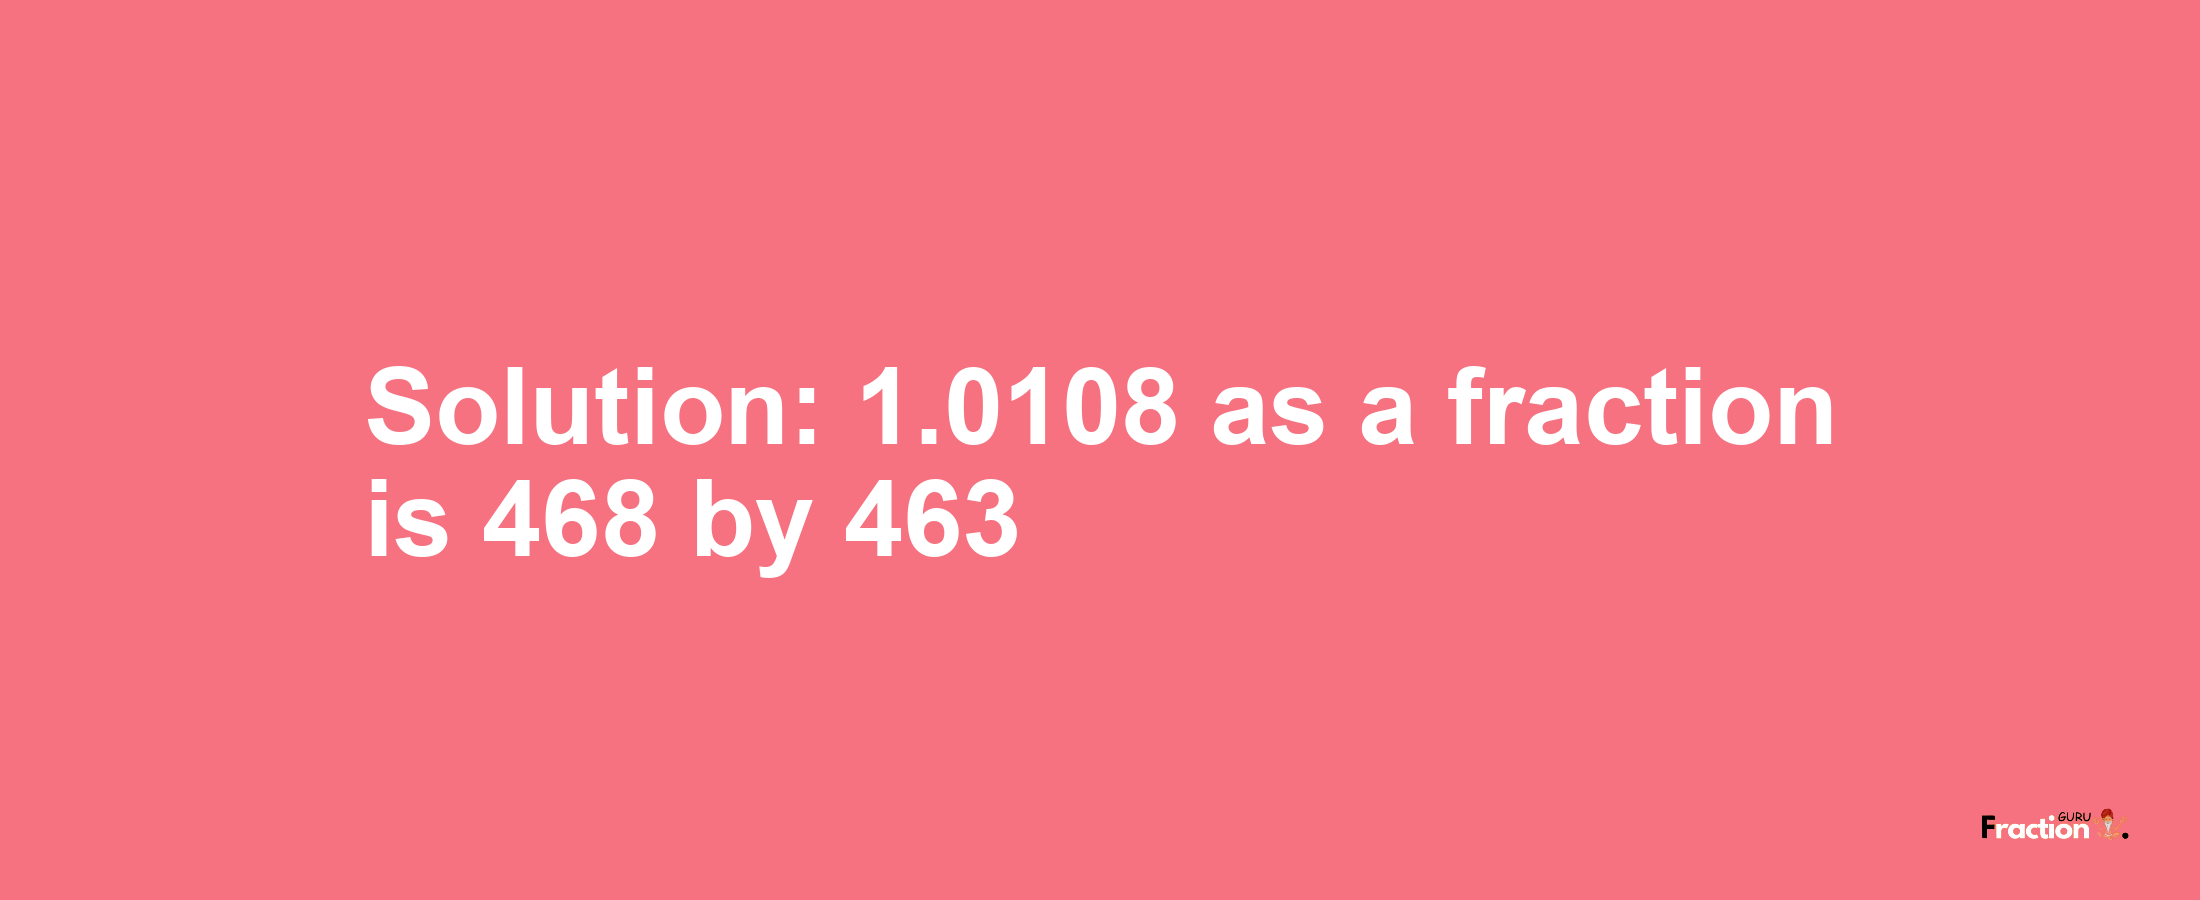 Solution:1.0108 as a fraction is 468/463